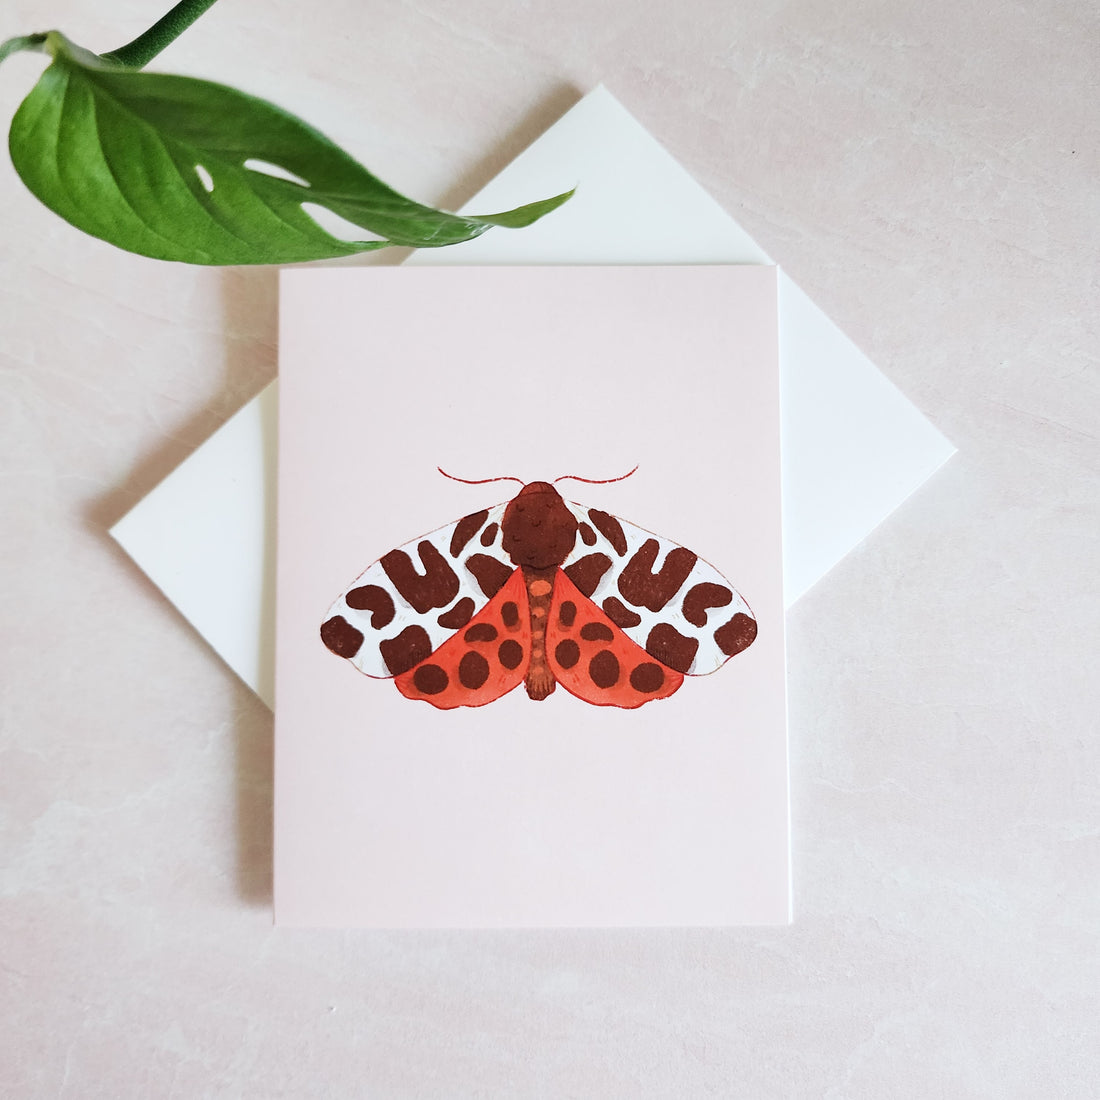 greeting card with a tiger moth illustration on a white envelope